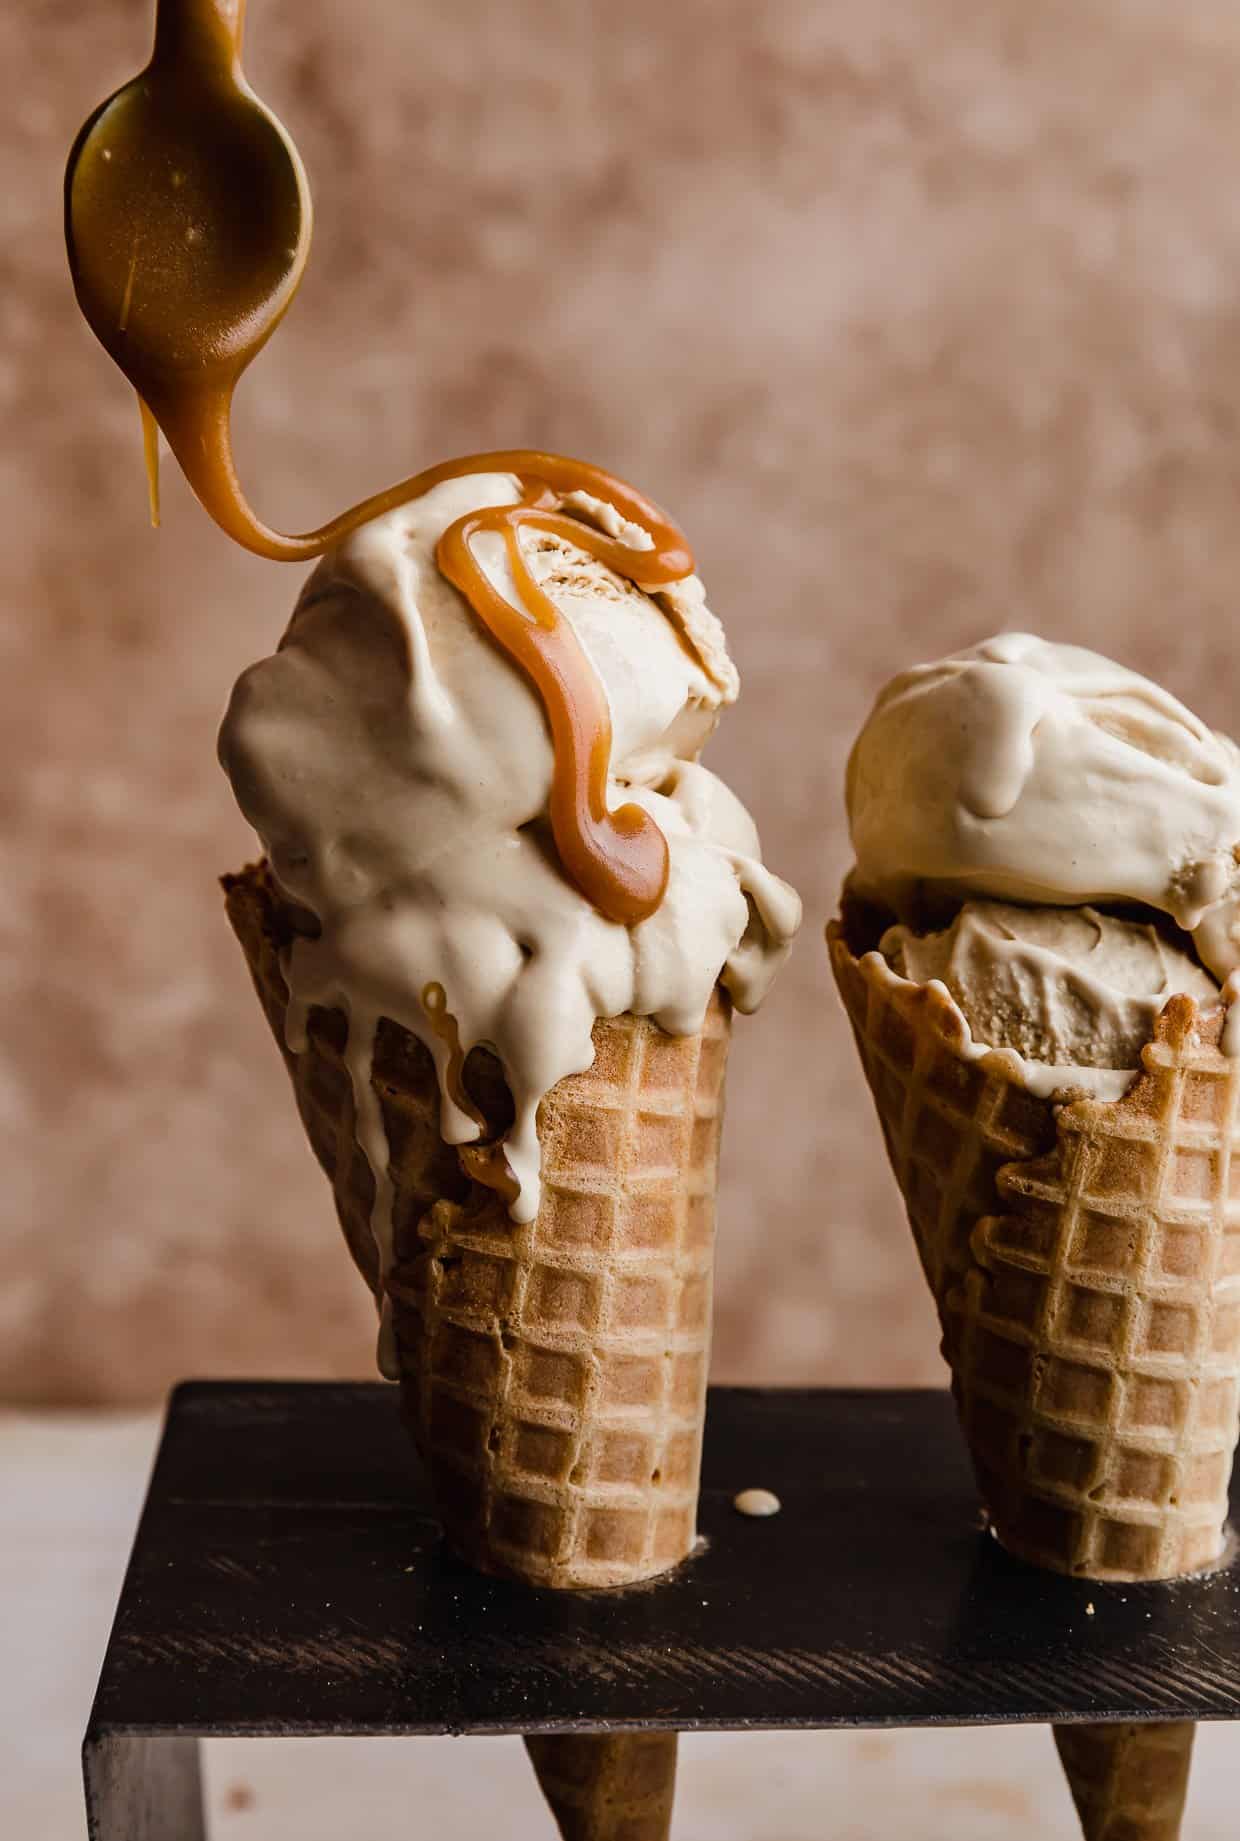 A butterscotch ice cream cone with butterscotch drizzled over the top with a spoon.